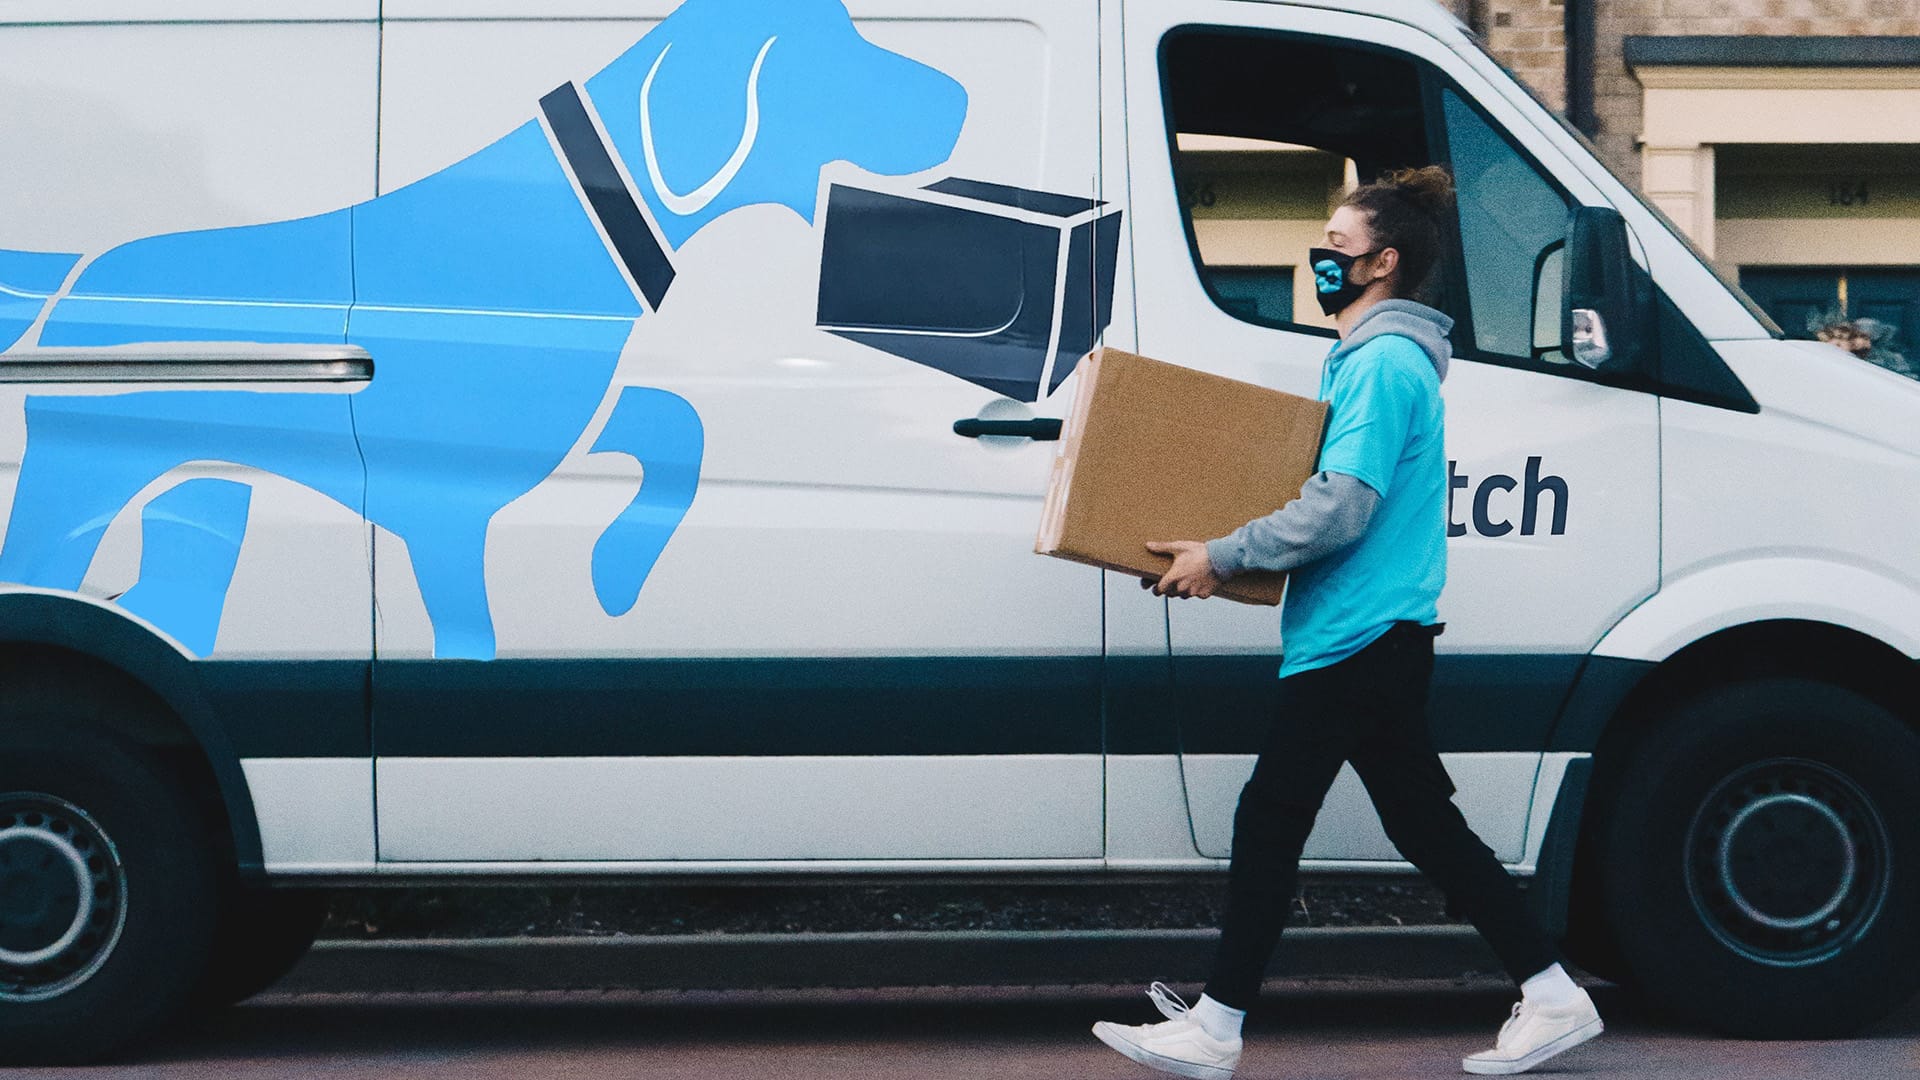 Fetch: Hiring delivery drivers in less than 8 minutes